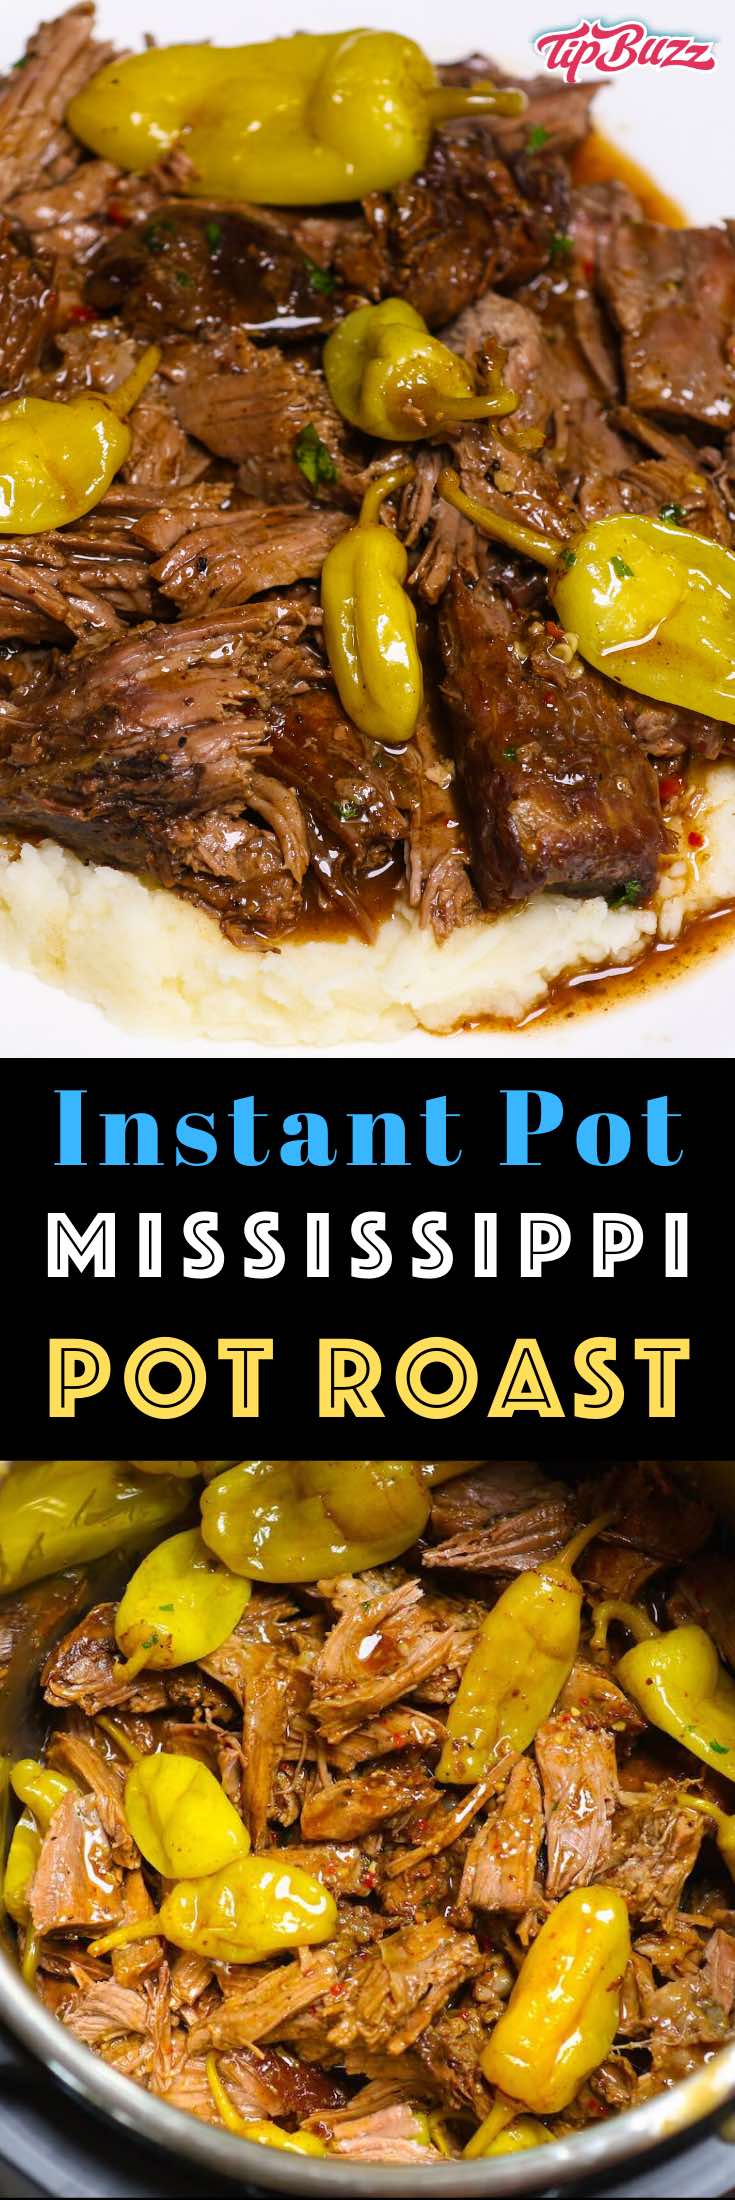 Instant Pot Mississippi Pot Roast is an easy and comforting dinner recipe that even picky eaters will devour. The chuck roast is fall-apart tender with a flavorful gravy. It’s made right in your pressure cooker and is so much faster than any other method!